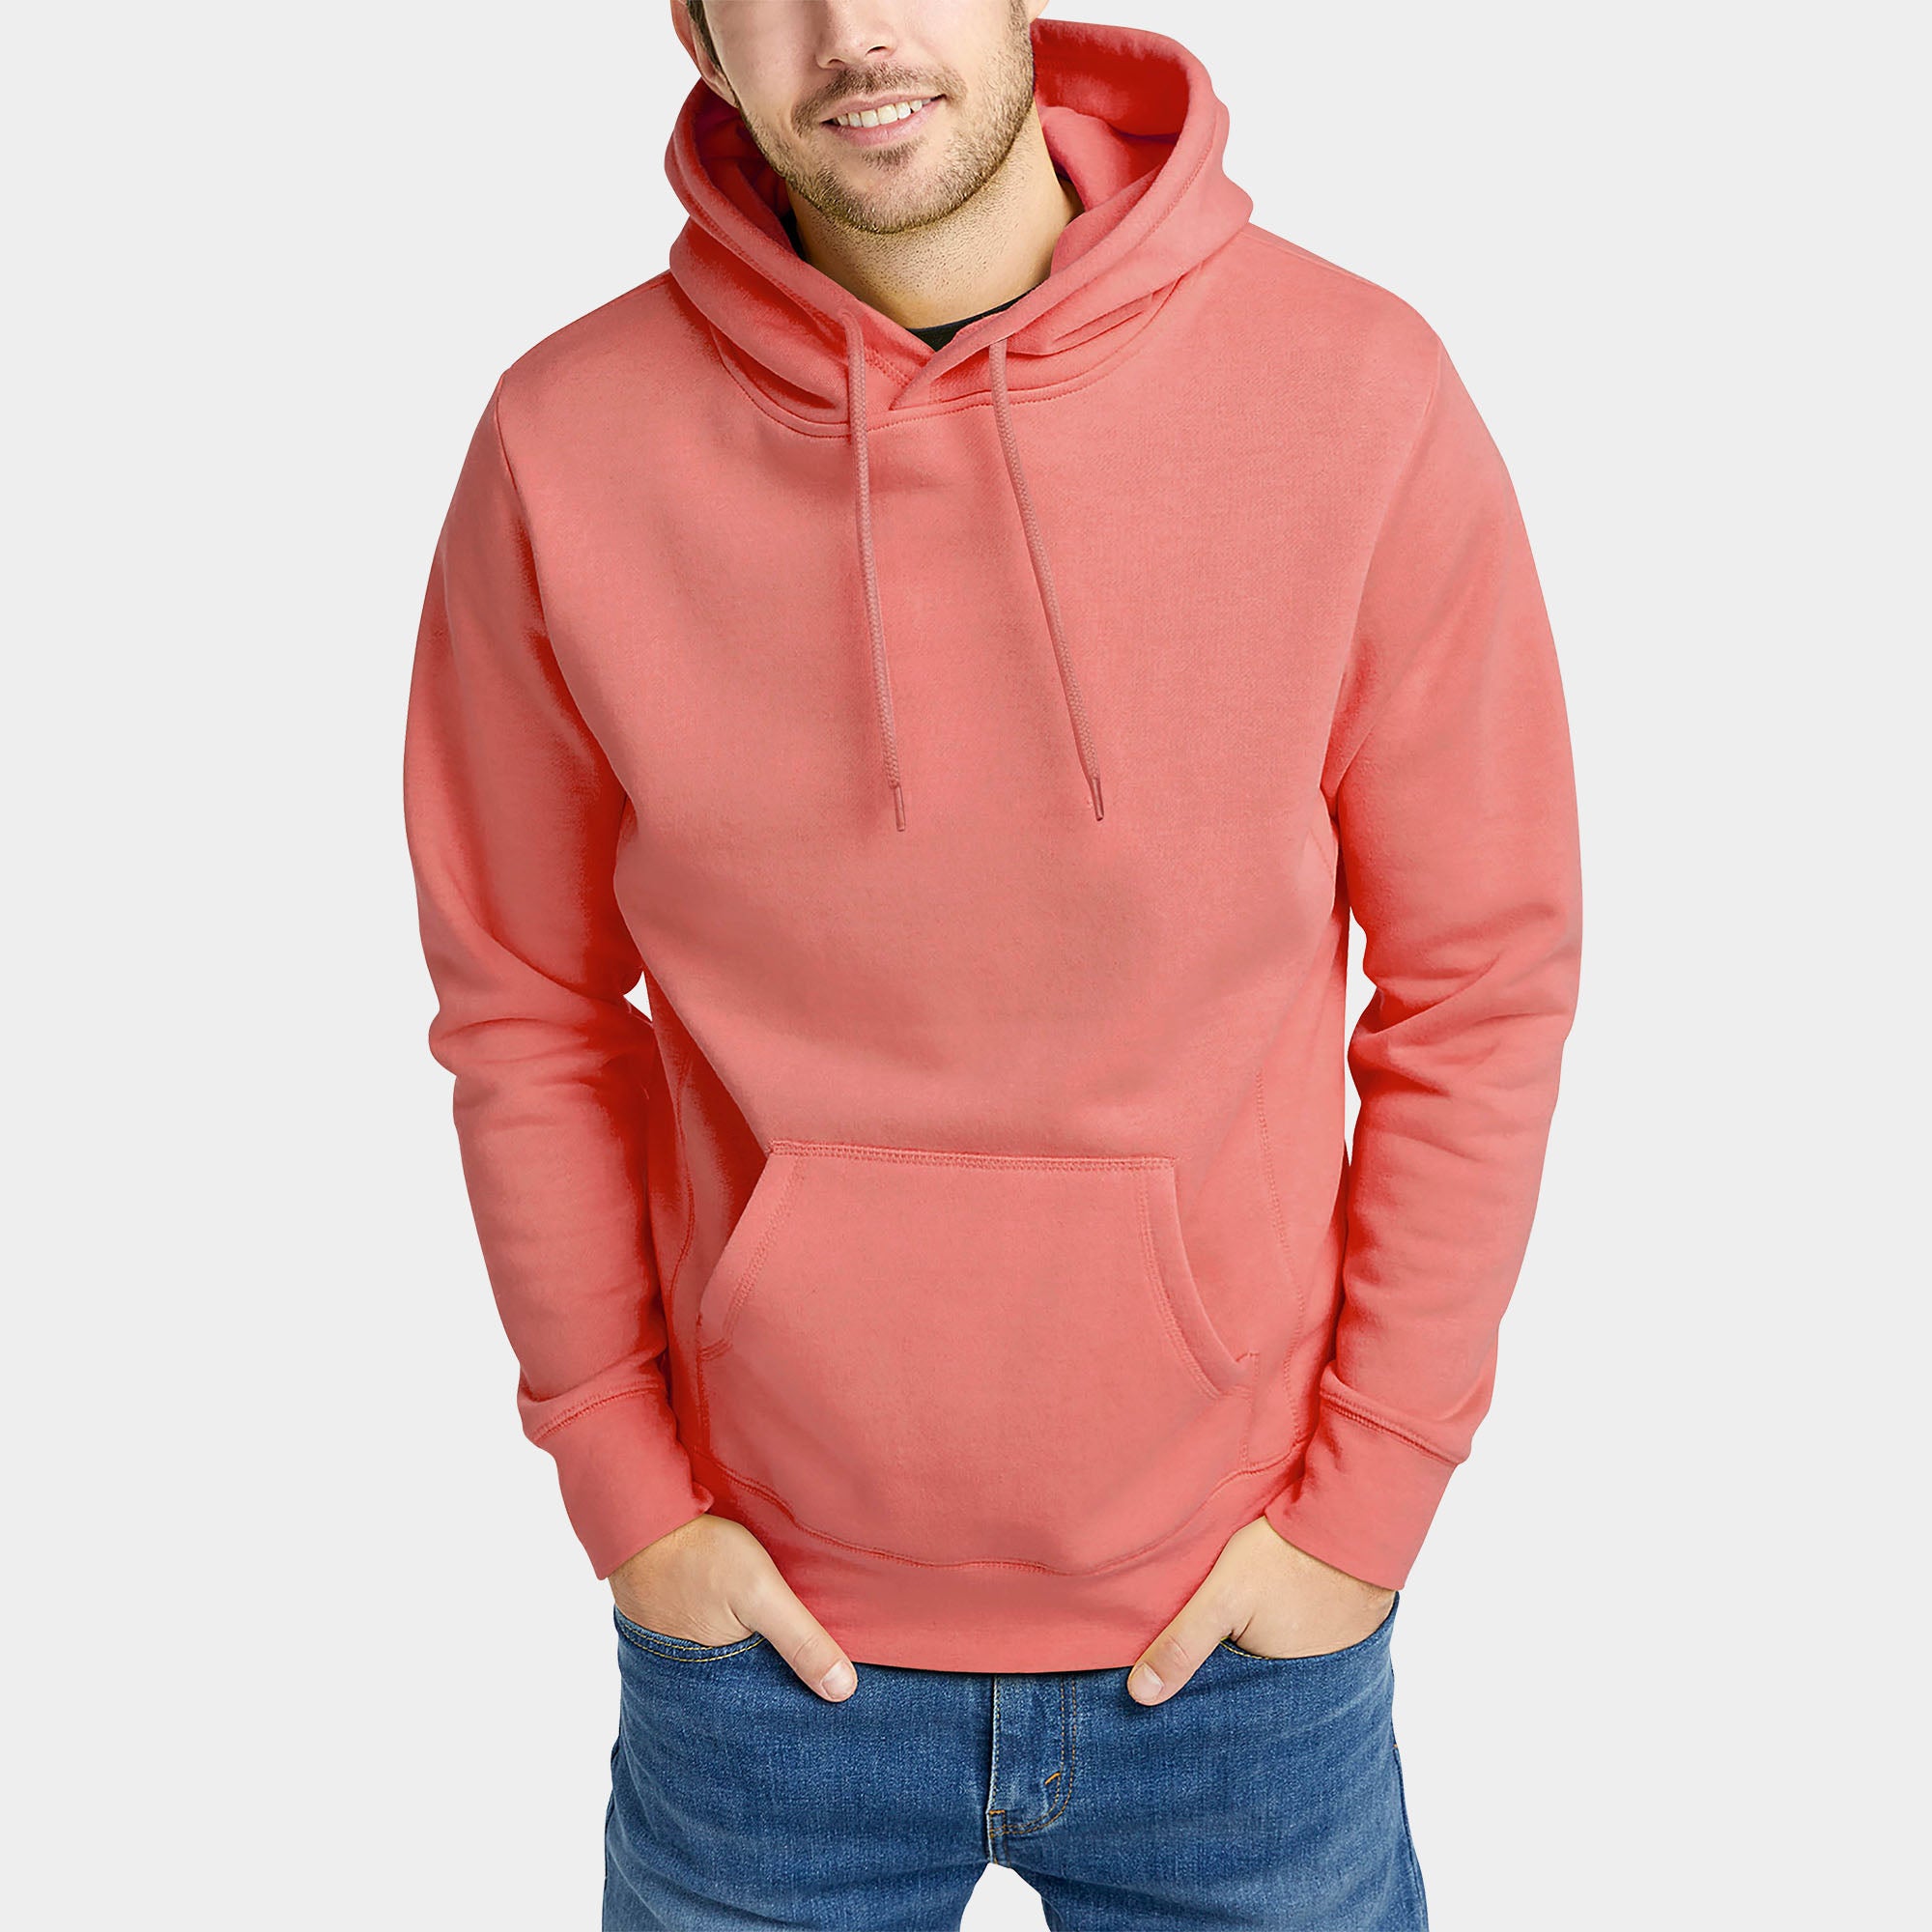 pullover_hoodie_for_men_black friday_deal_holiday gift_best hooded sweatshirts_printing_team sports_club uniform_screen dtg_heat transfer_dye embroidery_sublimation_ash pink_camo_sherpa lined_unisex_pink_black hoodie_men pullover_cotton apparel_lightweight_sweatshirt_hooded_beefy_ultimate_Islandred